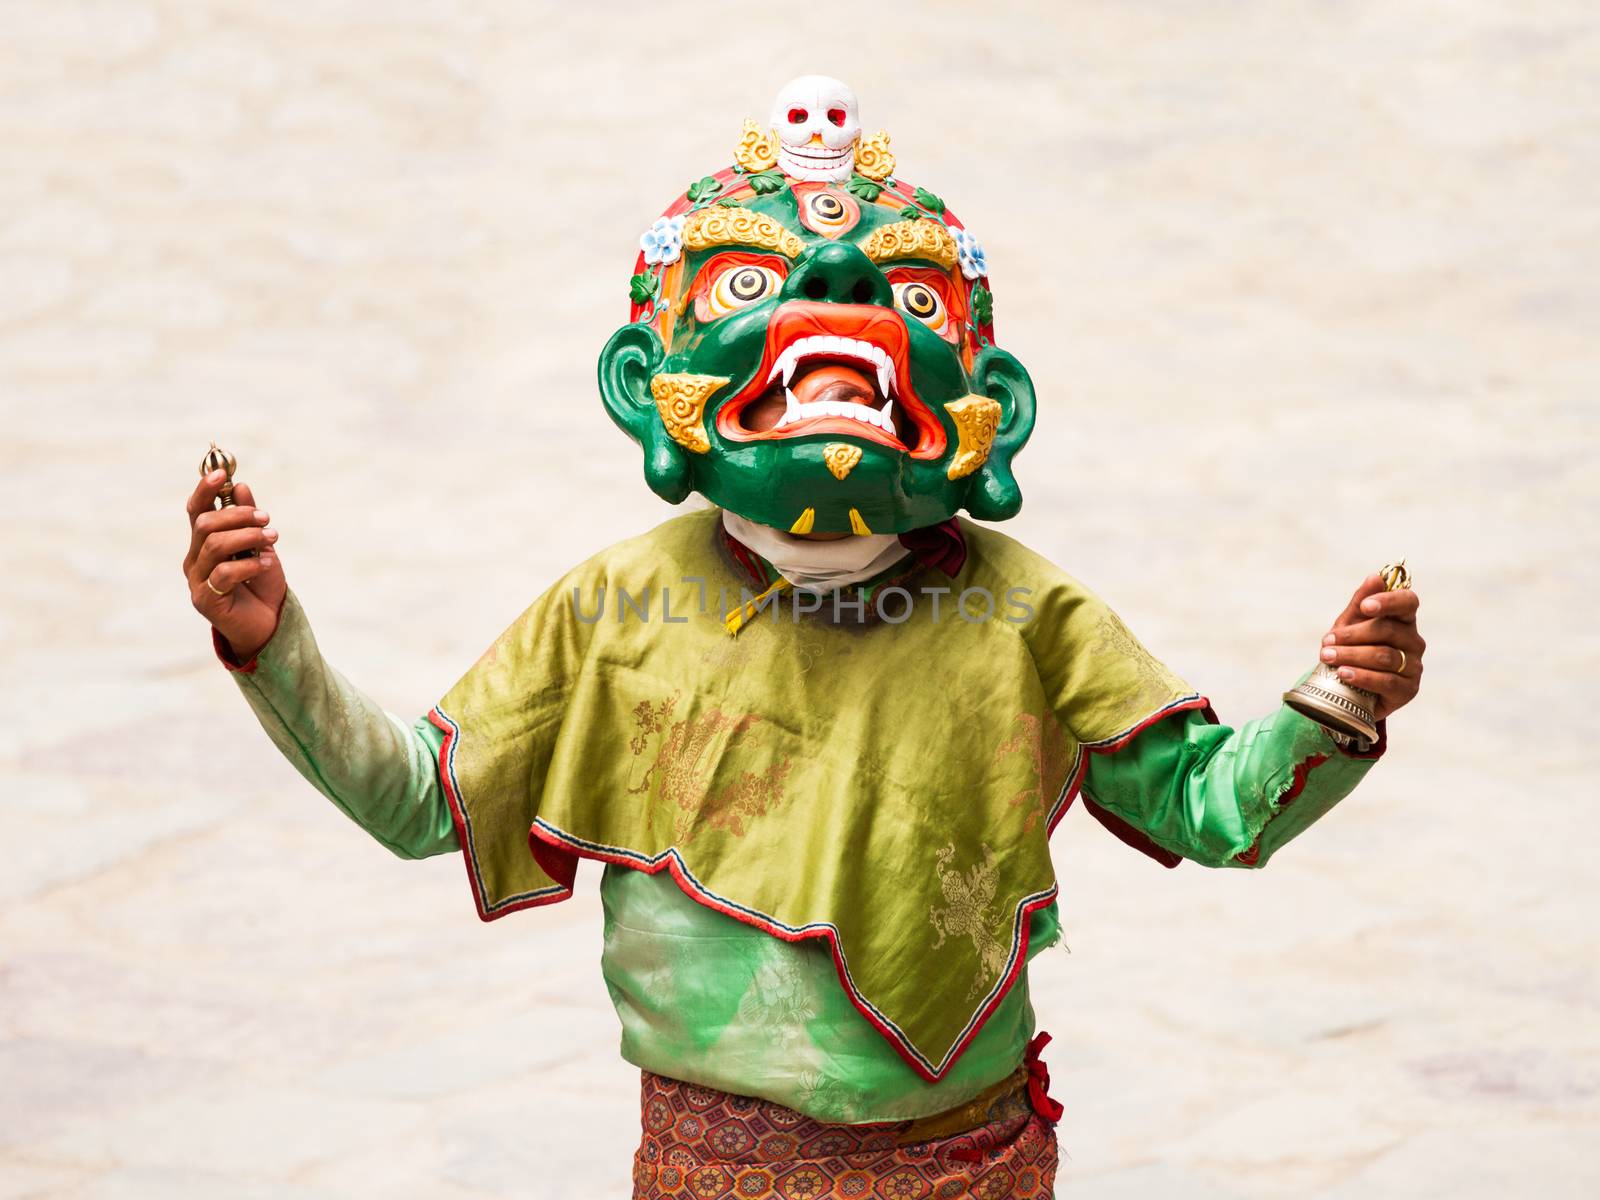 Monk with ritual bell and vajra performs a religious masked and costumed mystery dance of Tibetan Buddhism during the Cham Dance Festival by straannick